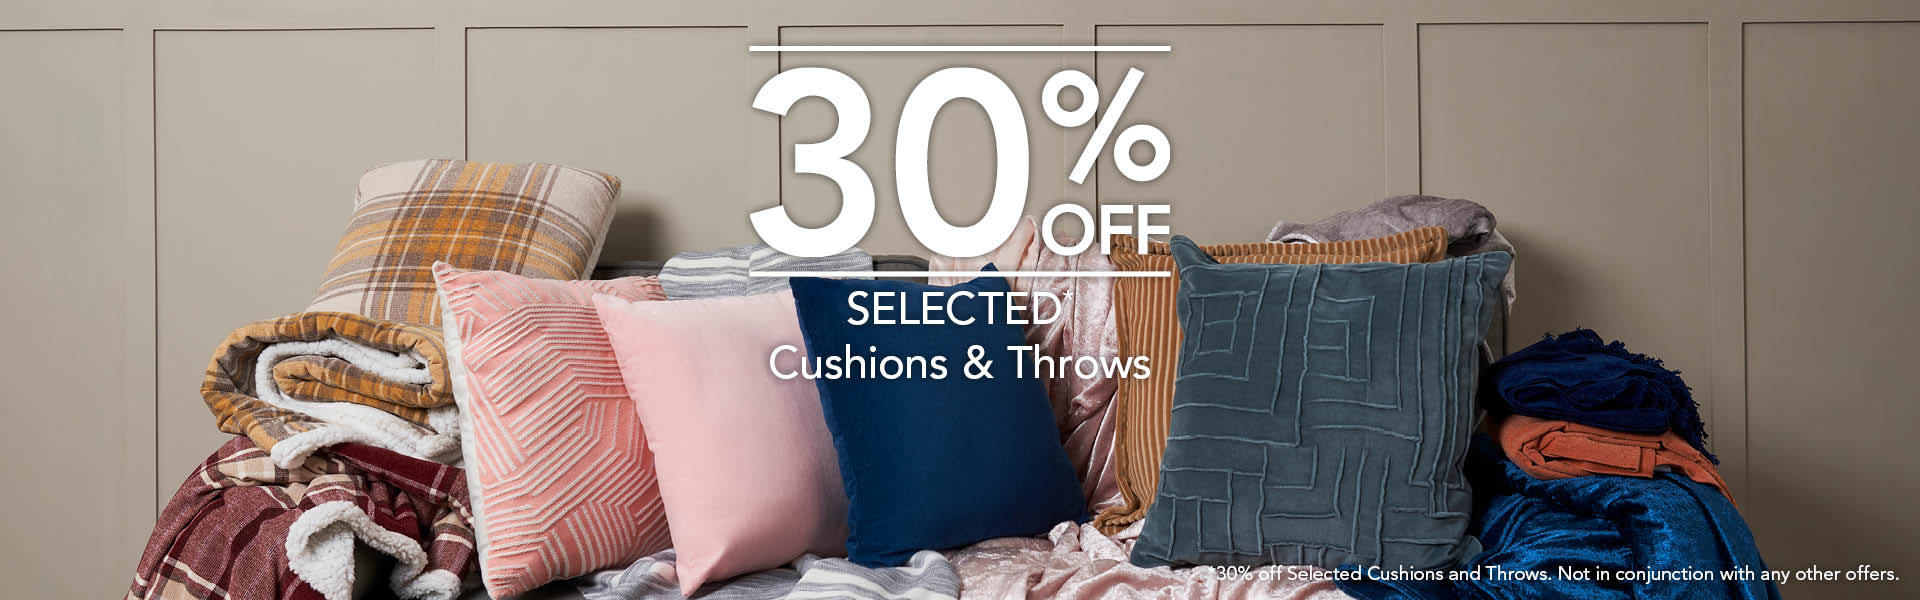 *30% off Selected Lines. Excludes exitisting offers